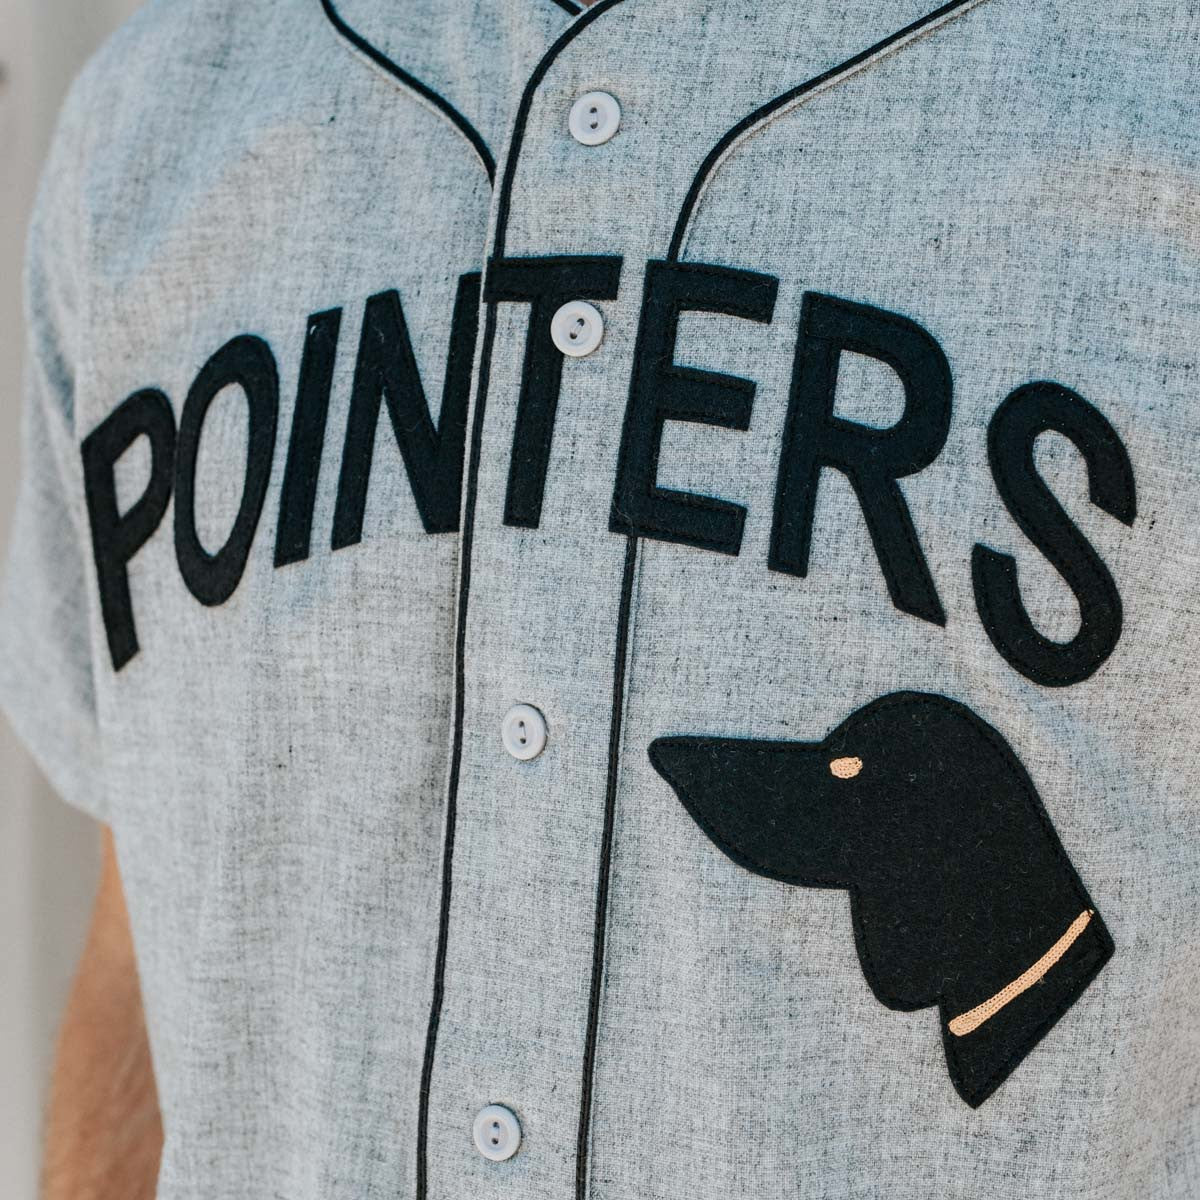 Barber's Point Pointers 1945 Road Jersey